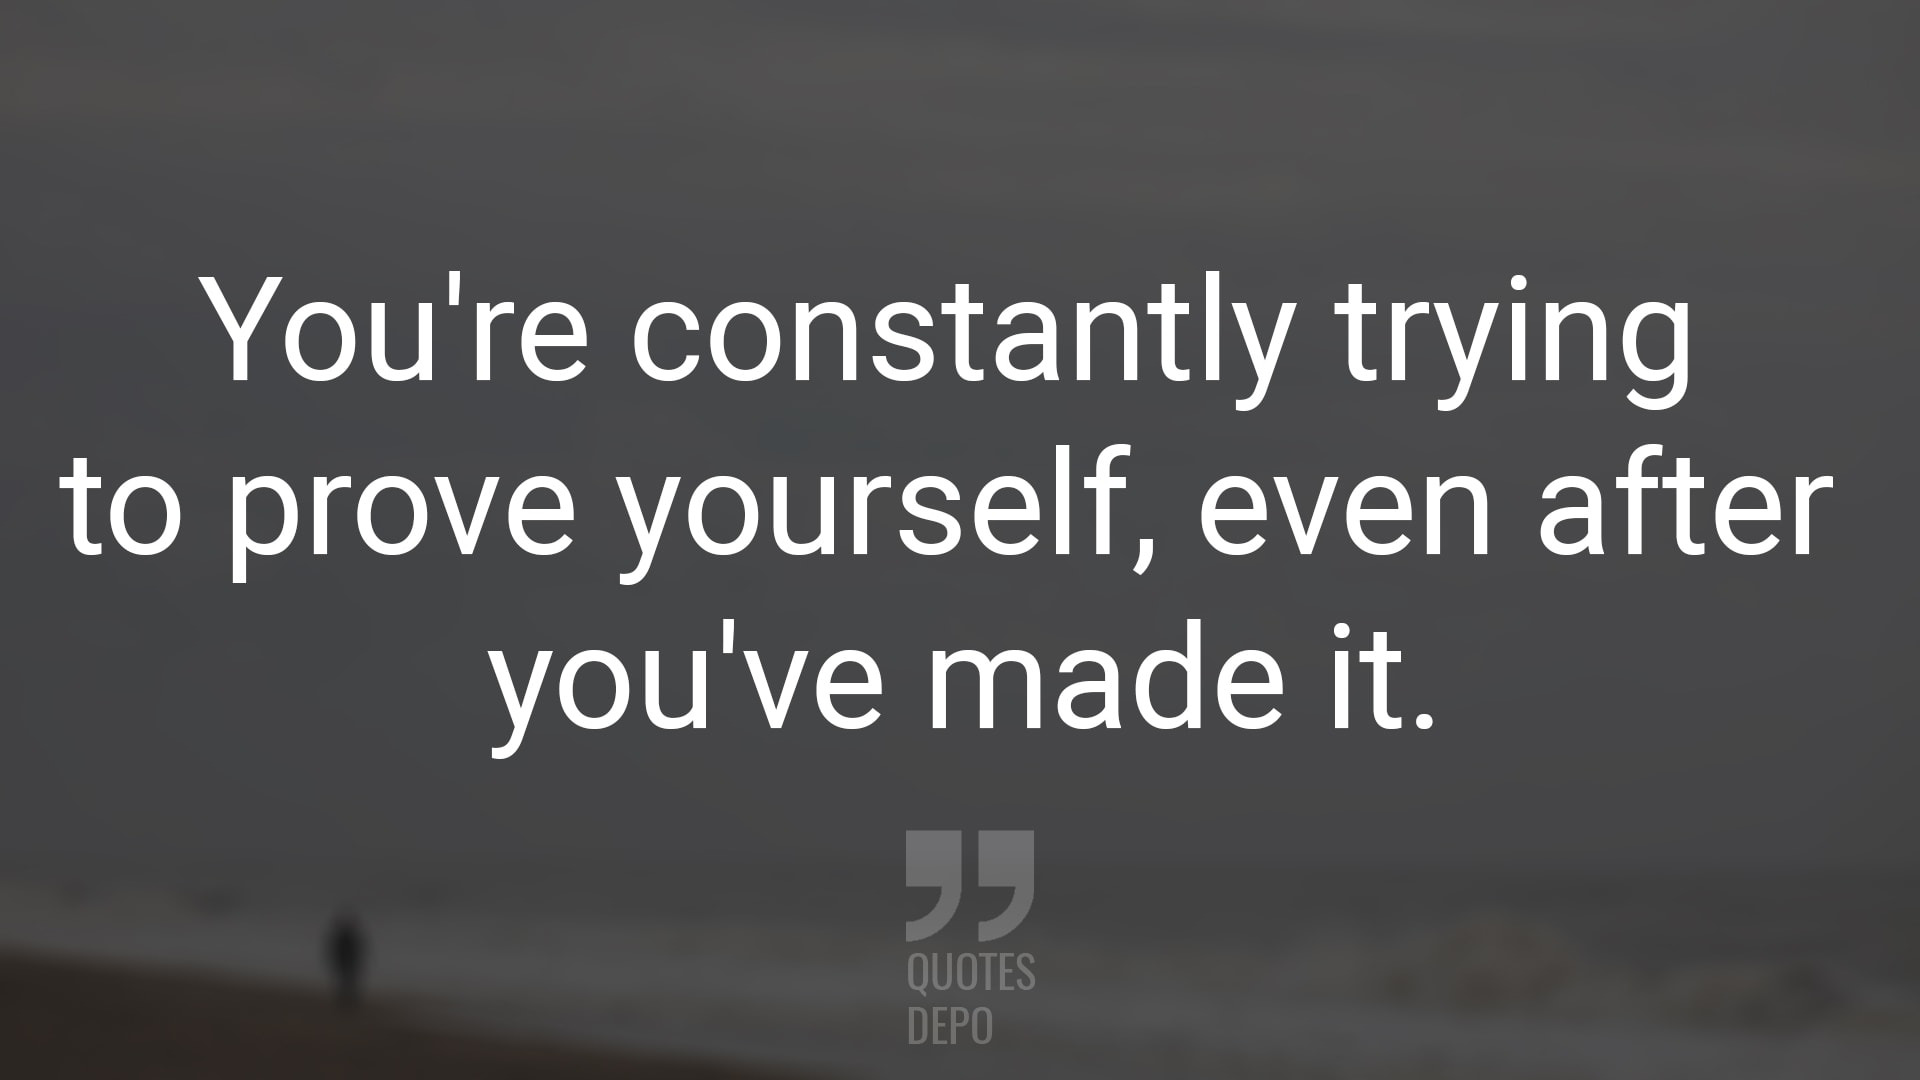 You're Constantly Trying to Prove Yourself